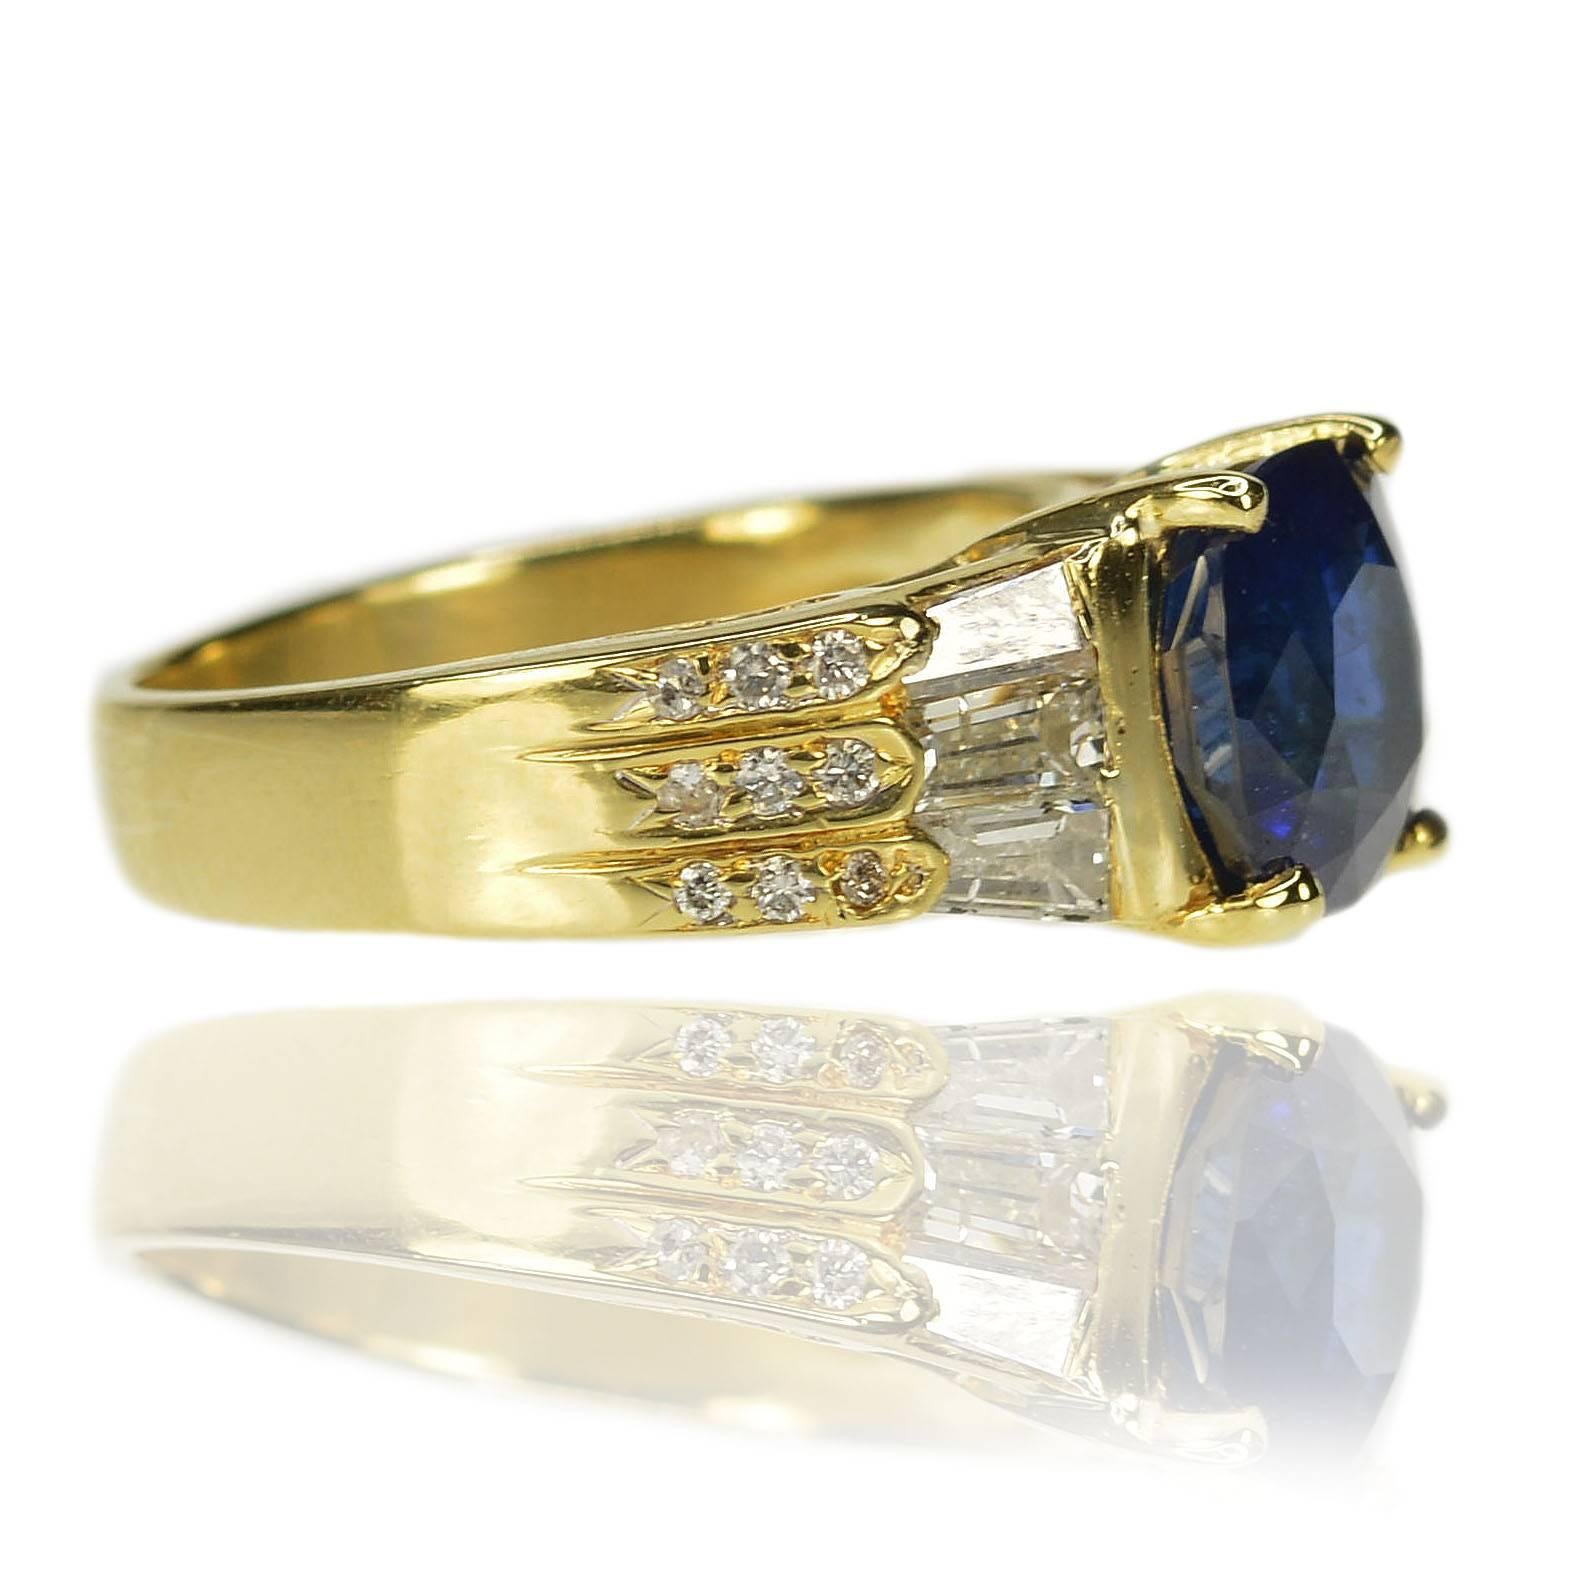 18k Ring with AGL certified 3.05 carat Ceylon Sapphire and 1.02 carats of tapered baguette and round brilliant diamonds. 6.04g